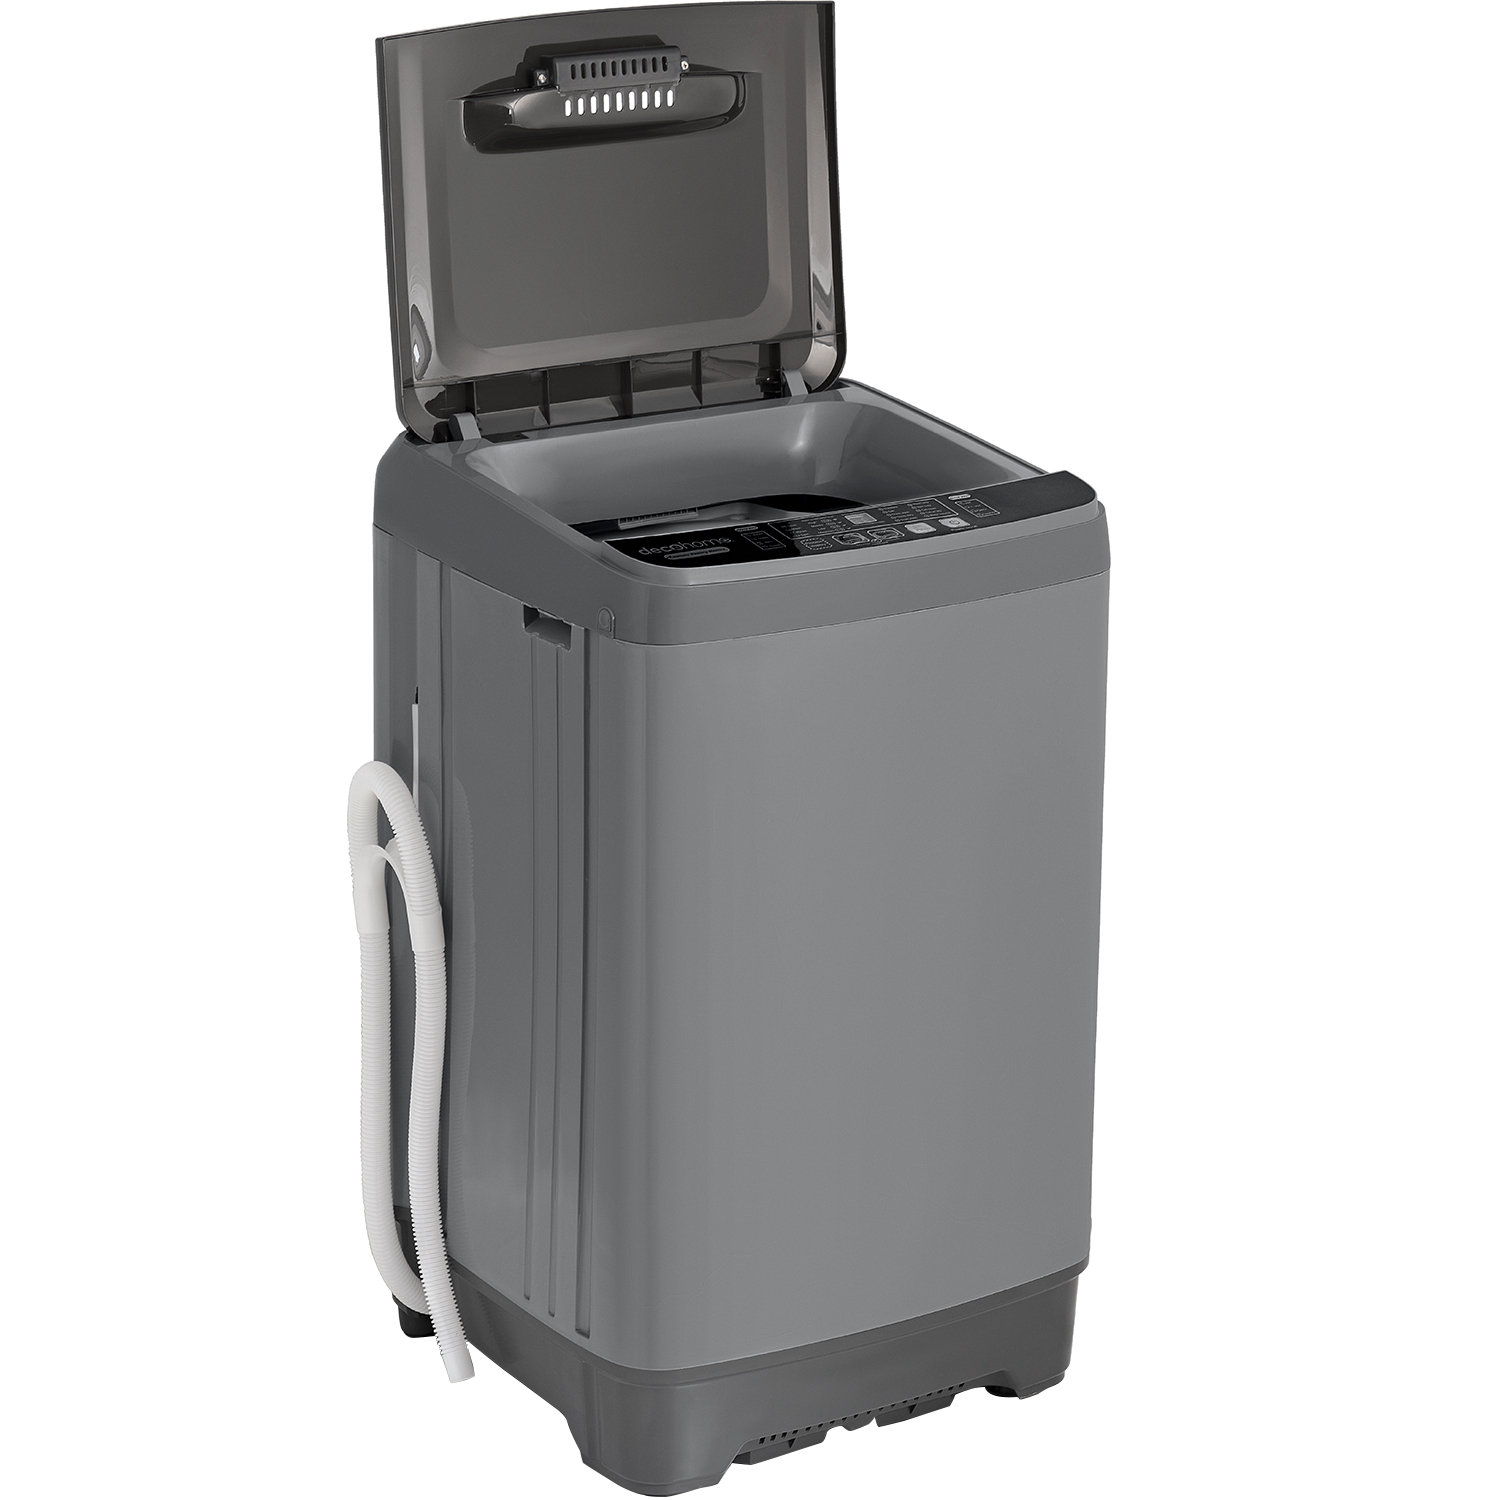 Panda 1.34 Cubic Feet cu. ft. Portable Washer in White & Reviews